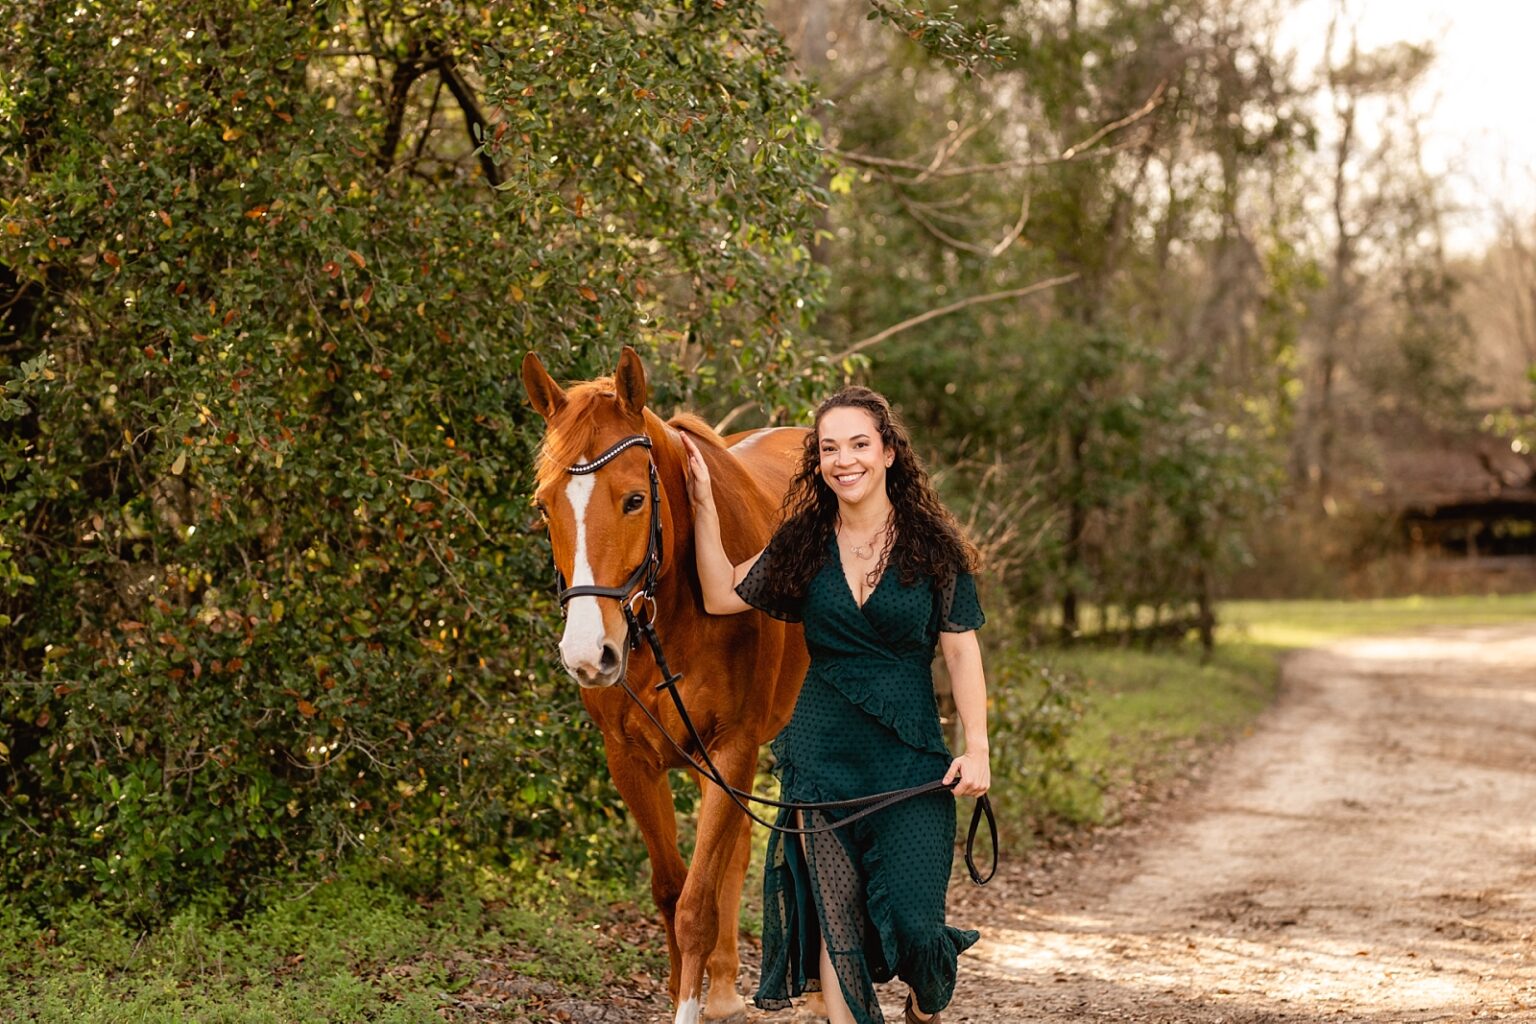 Dressage photographer in North Florida. Spoon Blue Stables in Tallahassee, FL. Chestnut warmblood cross mare.